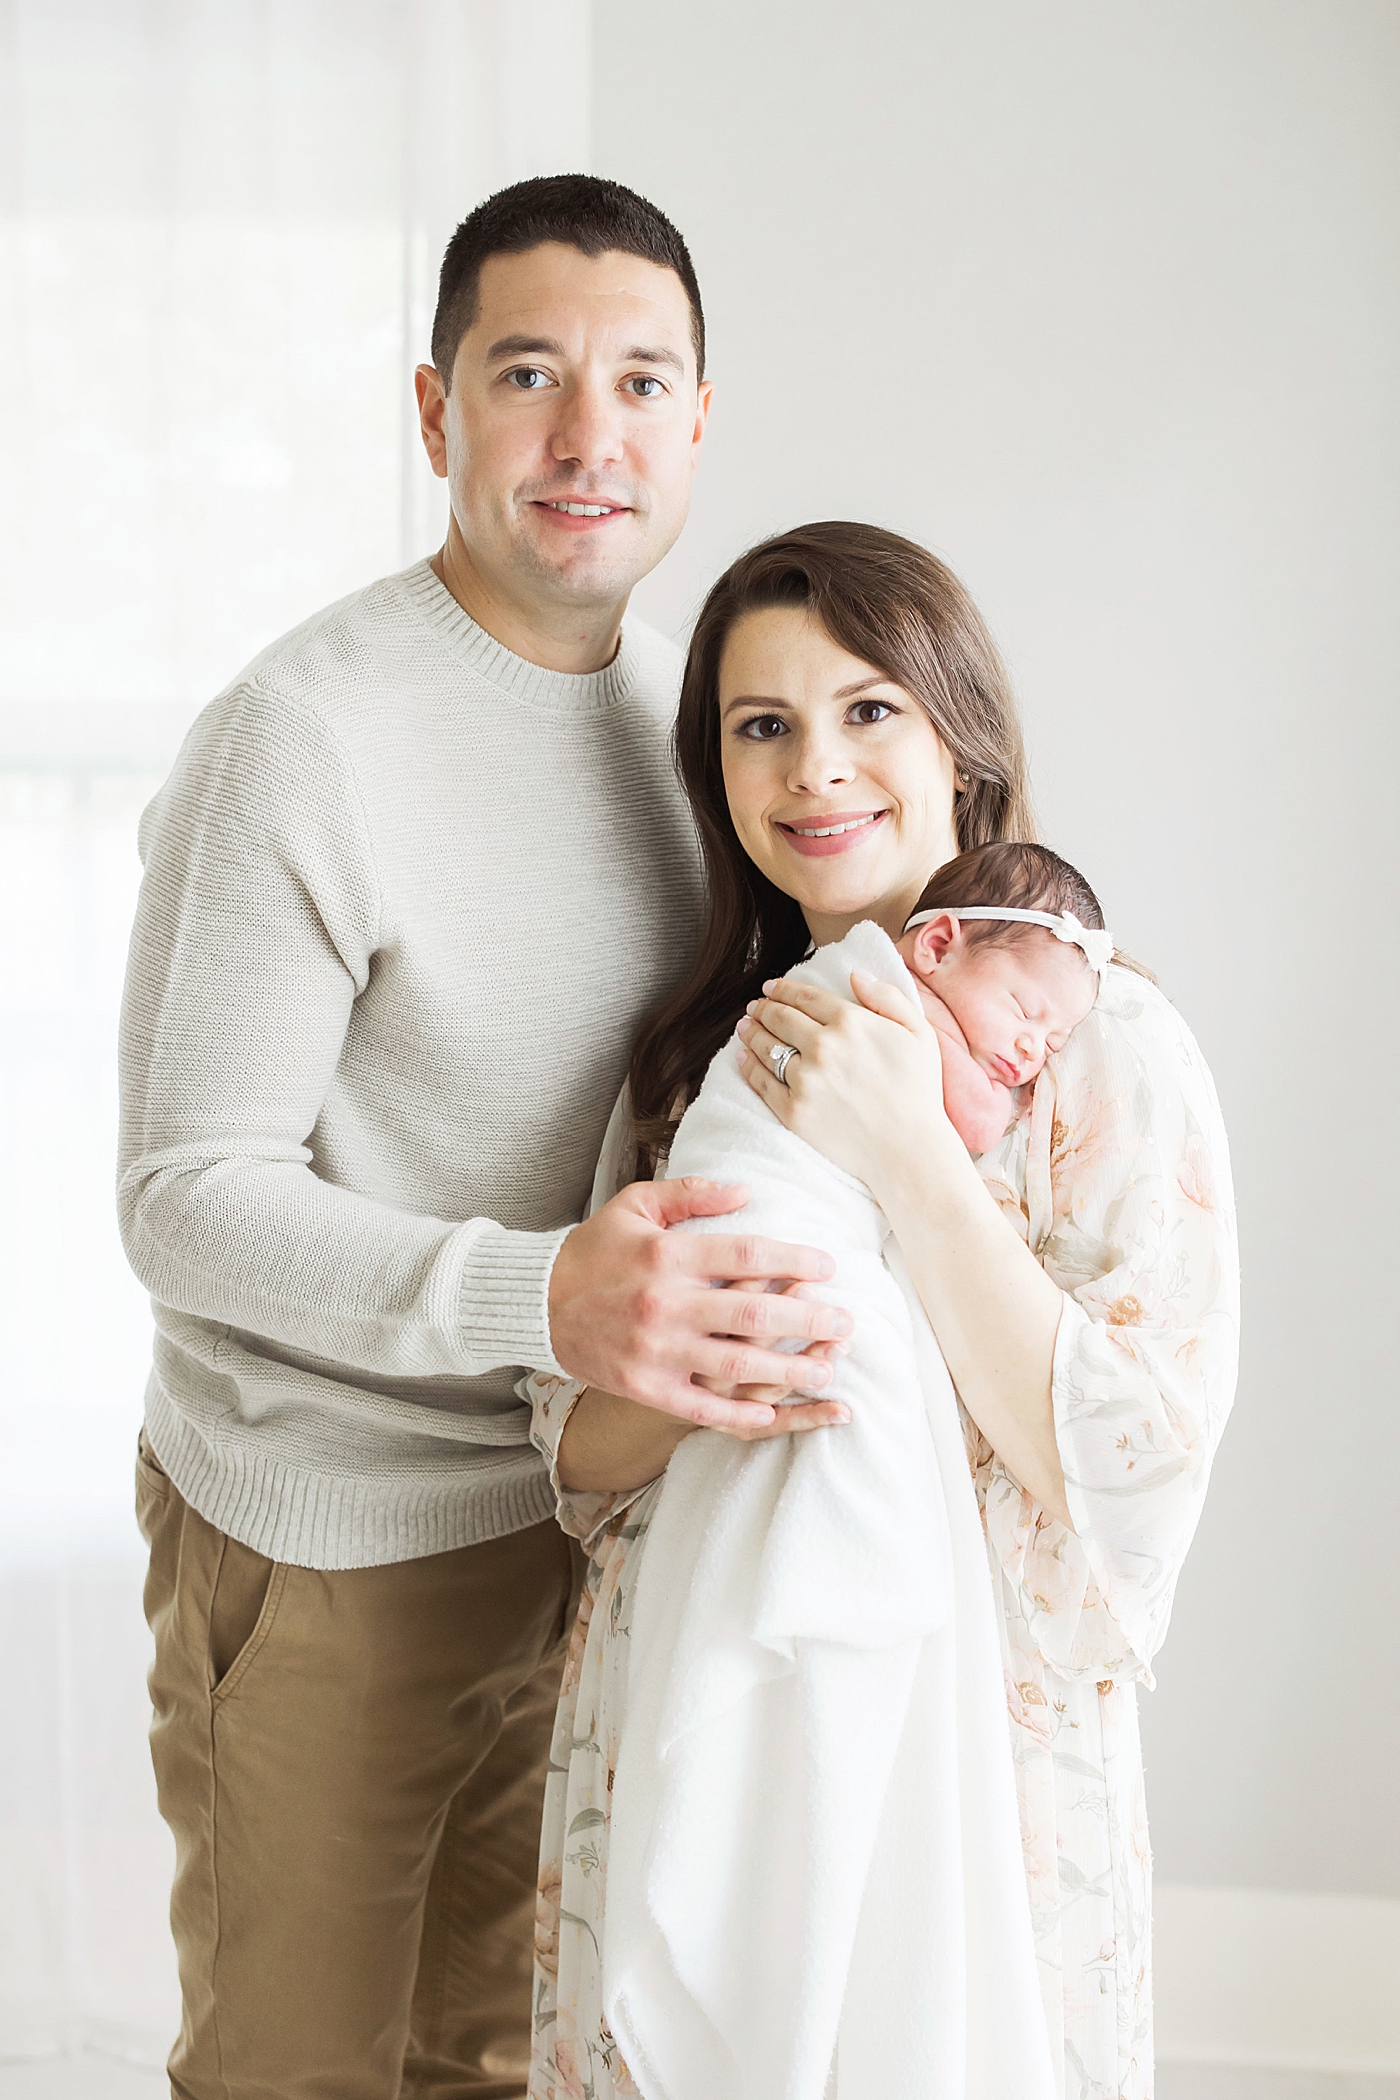 New parents with their newborn daughter. Photo by Fresh Light Photography.